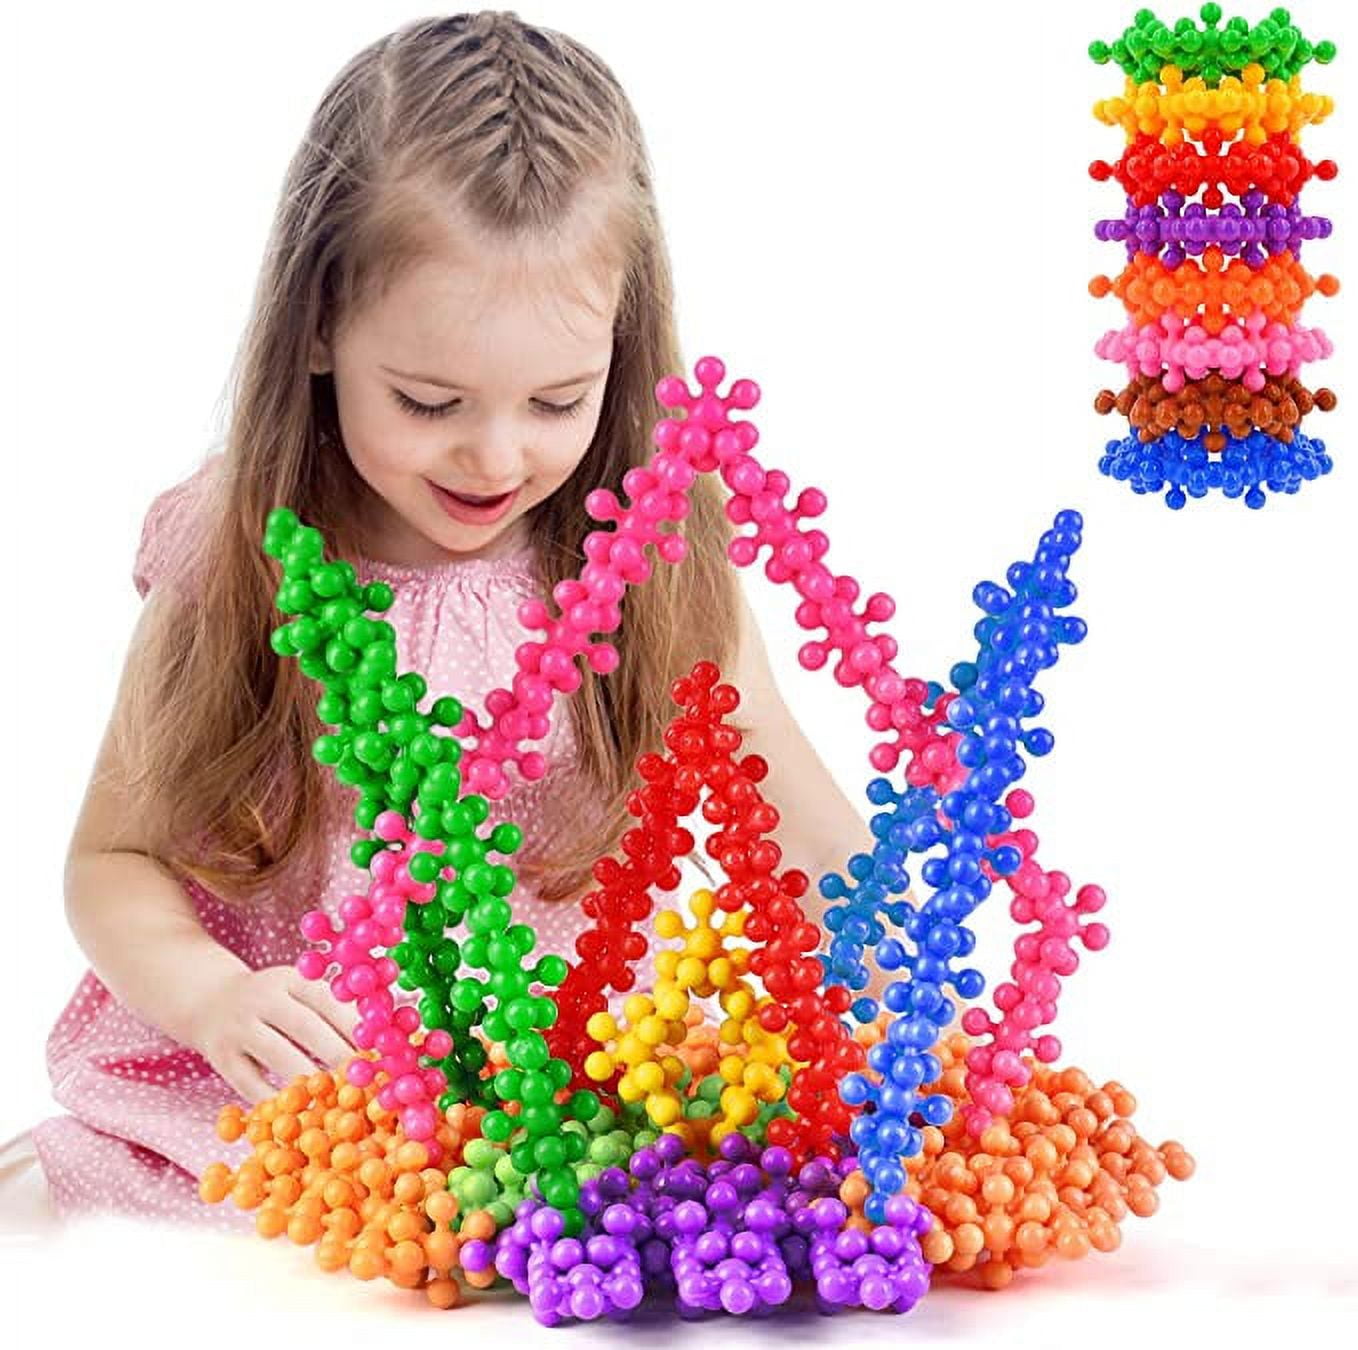 Educational Building Toys STEM Learning Kit with 100PCS Construction Blocks  for Preschool Kids, Engineering Toys Creative Game Fun Activity Superior